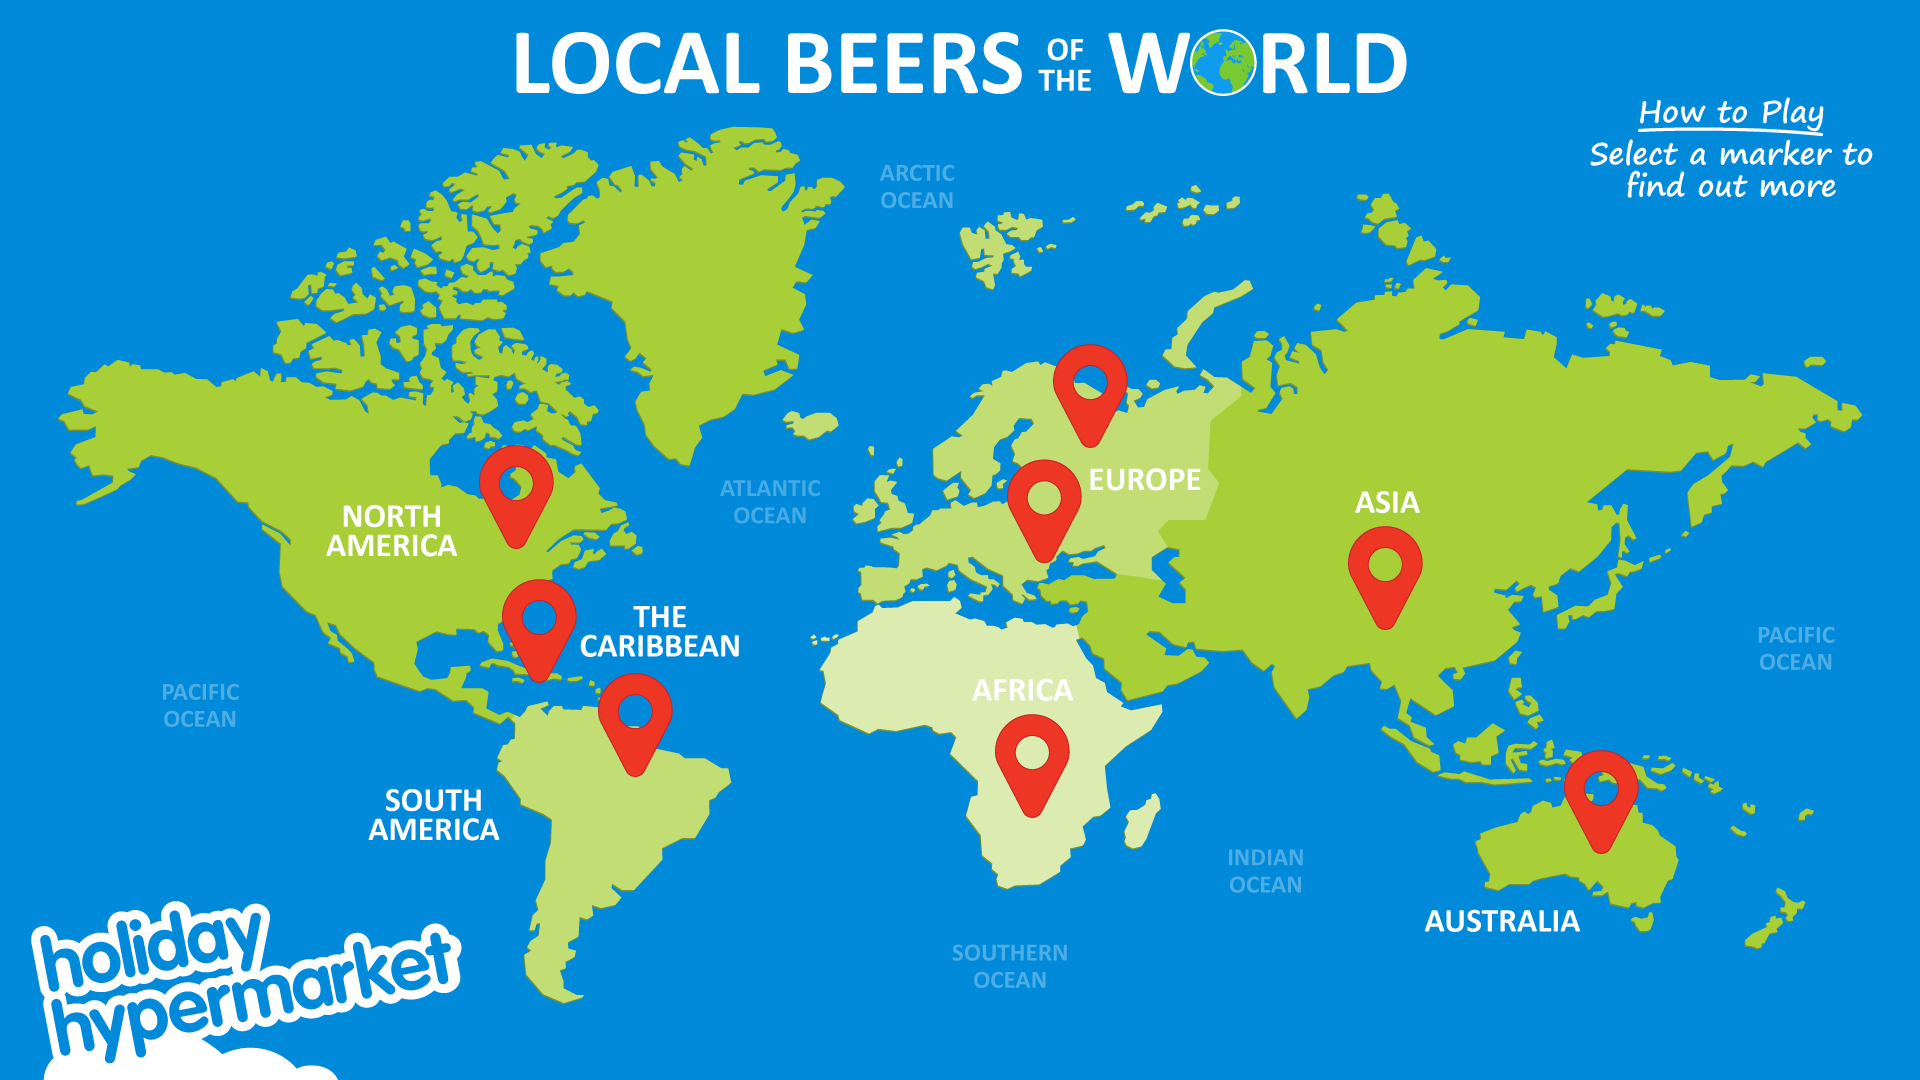 New interactive map showcases local beers of the world you can enjoy